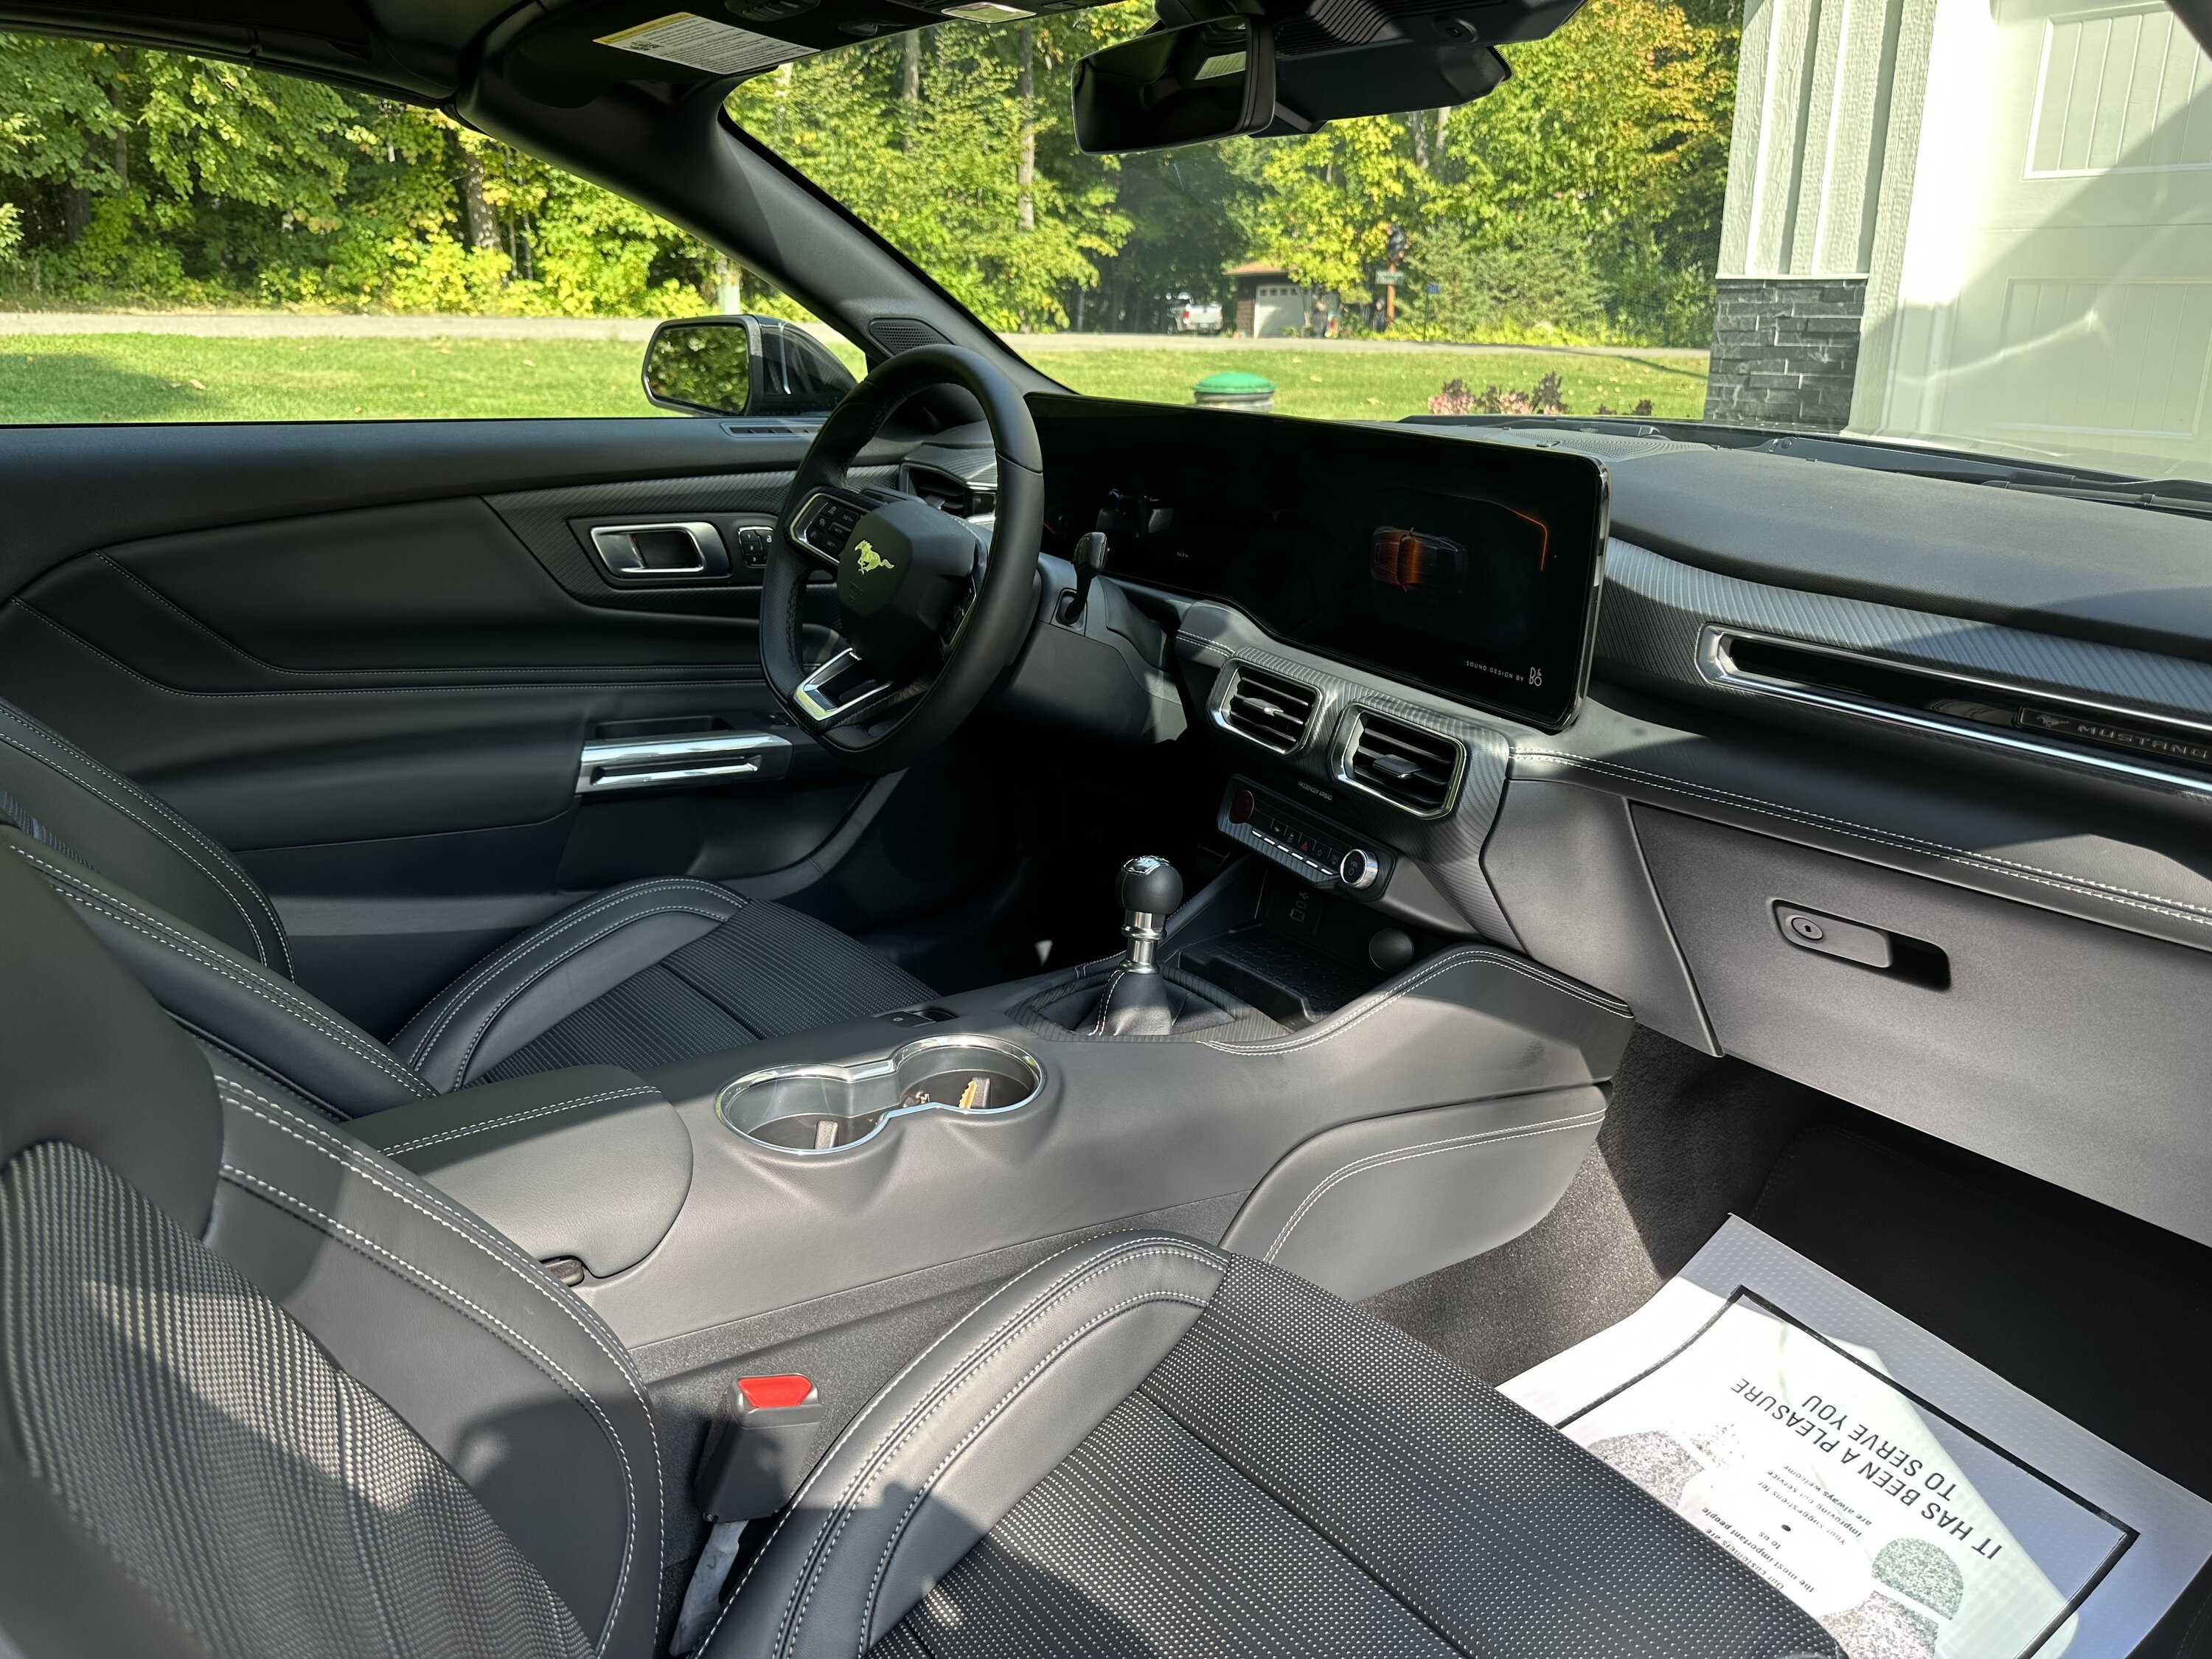 S650 Mustang Let’s post interior photos here! IMG_0899